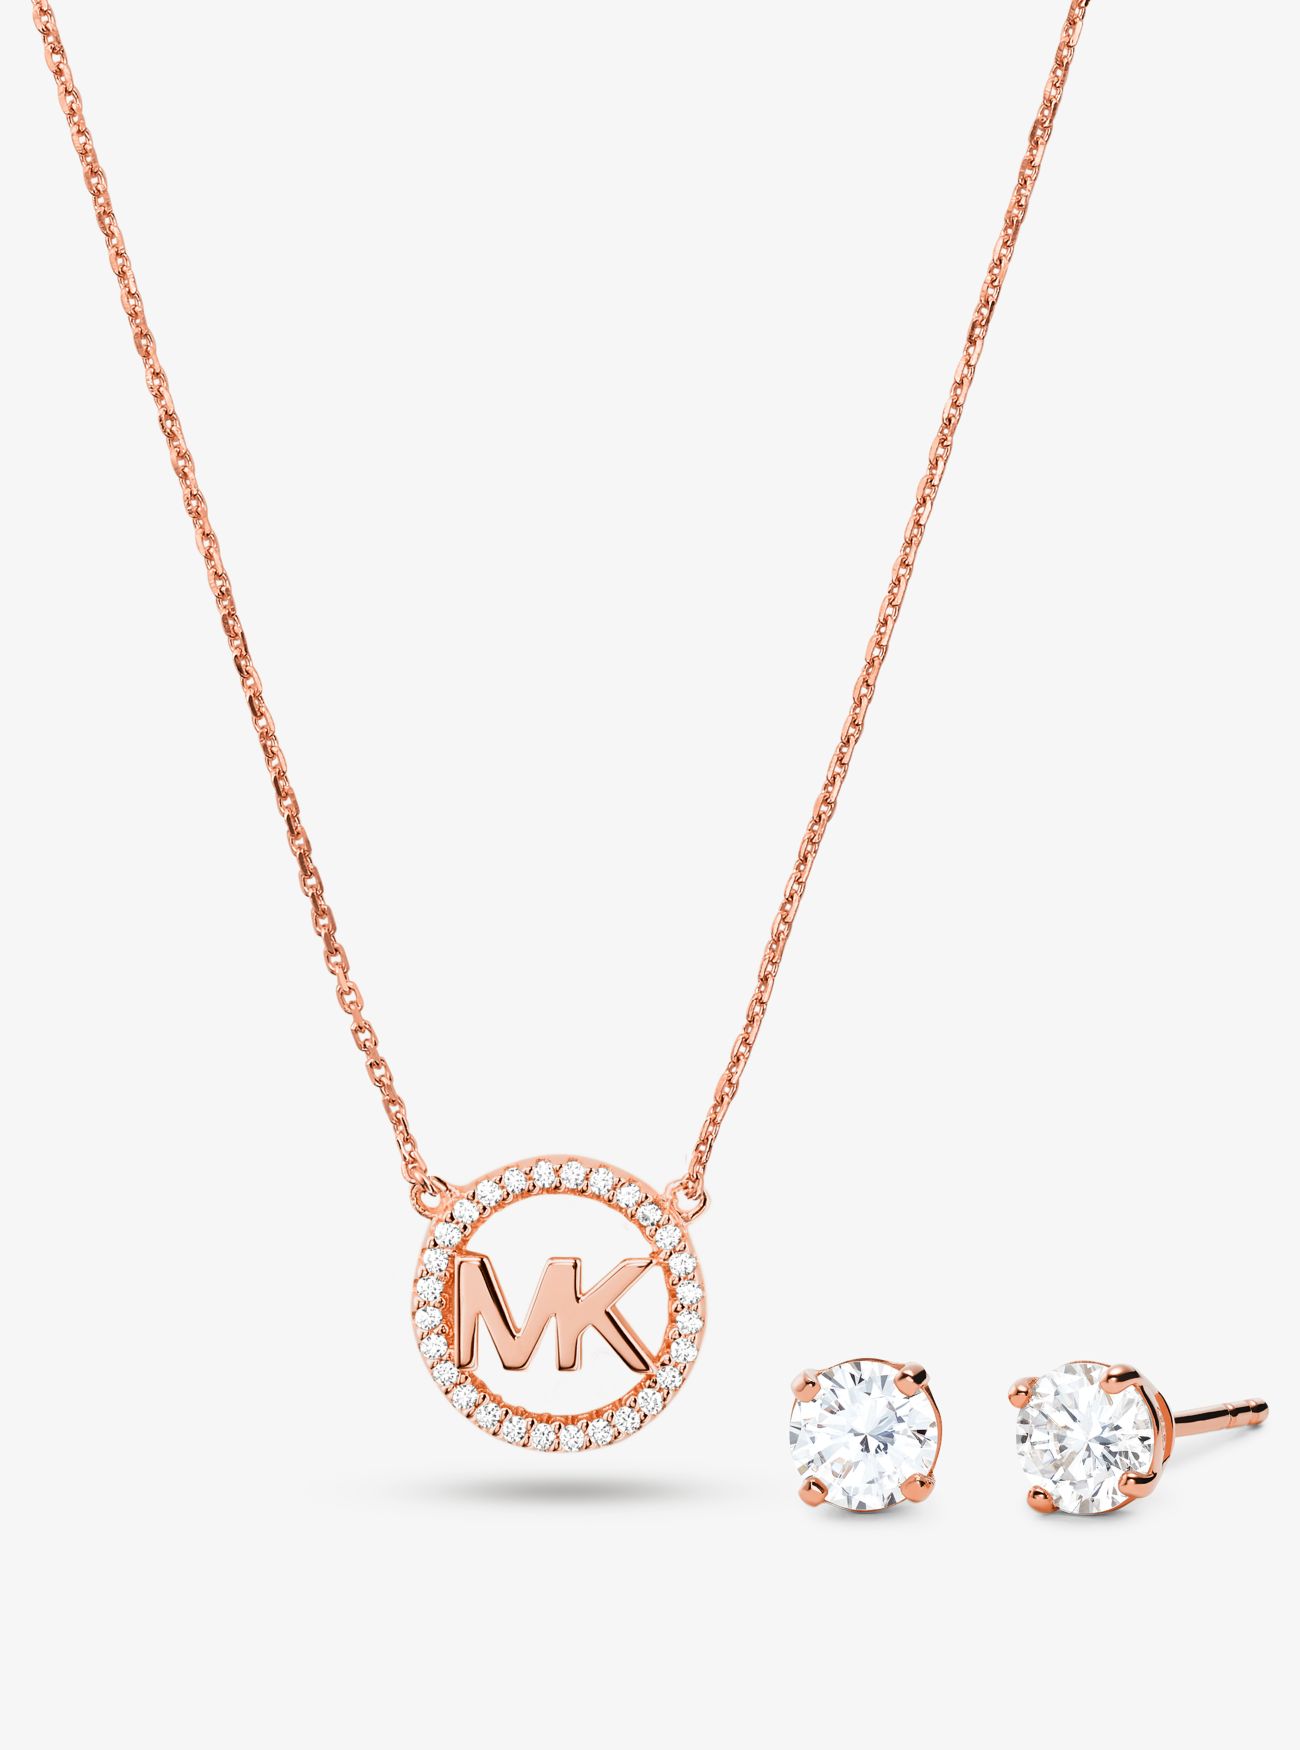 MK 14K Rose Gold-Plated Sterling Silver PavÃ© Logo Charm Necklace and Stud Earrings Set - Rose Gold - Michael Kors